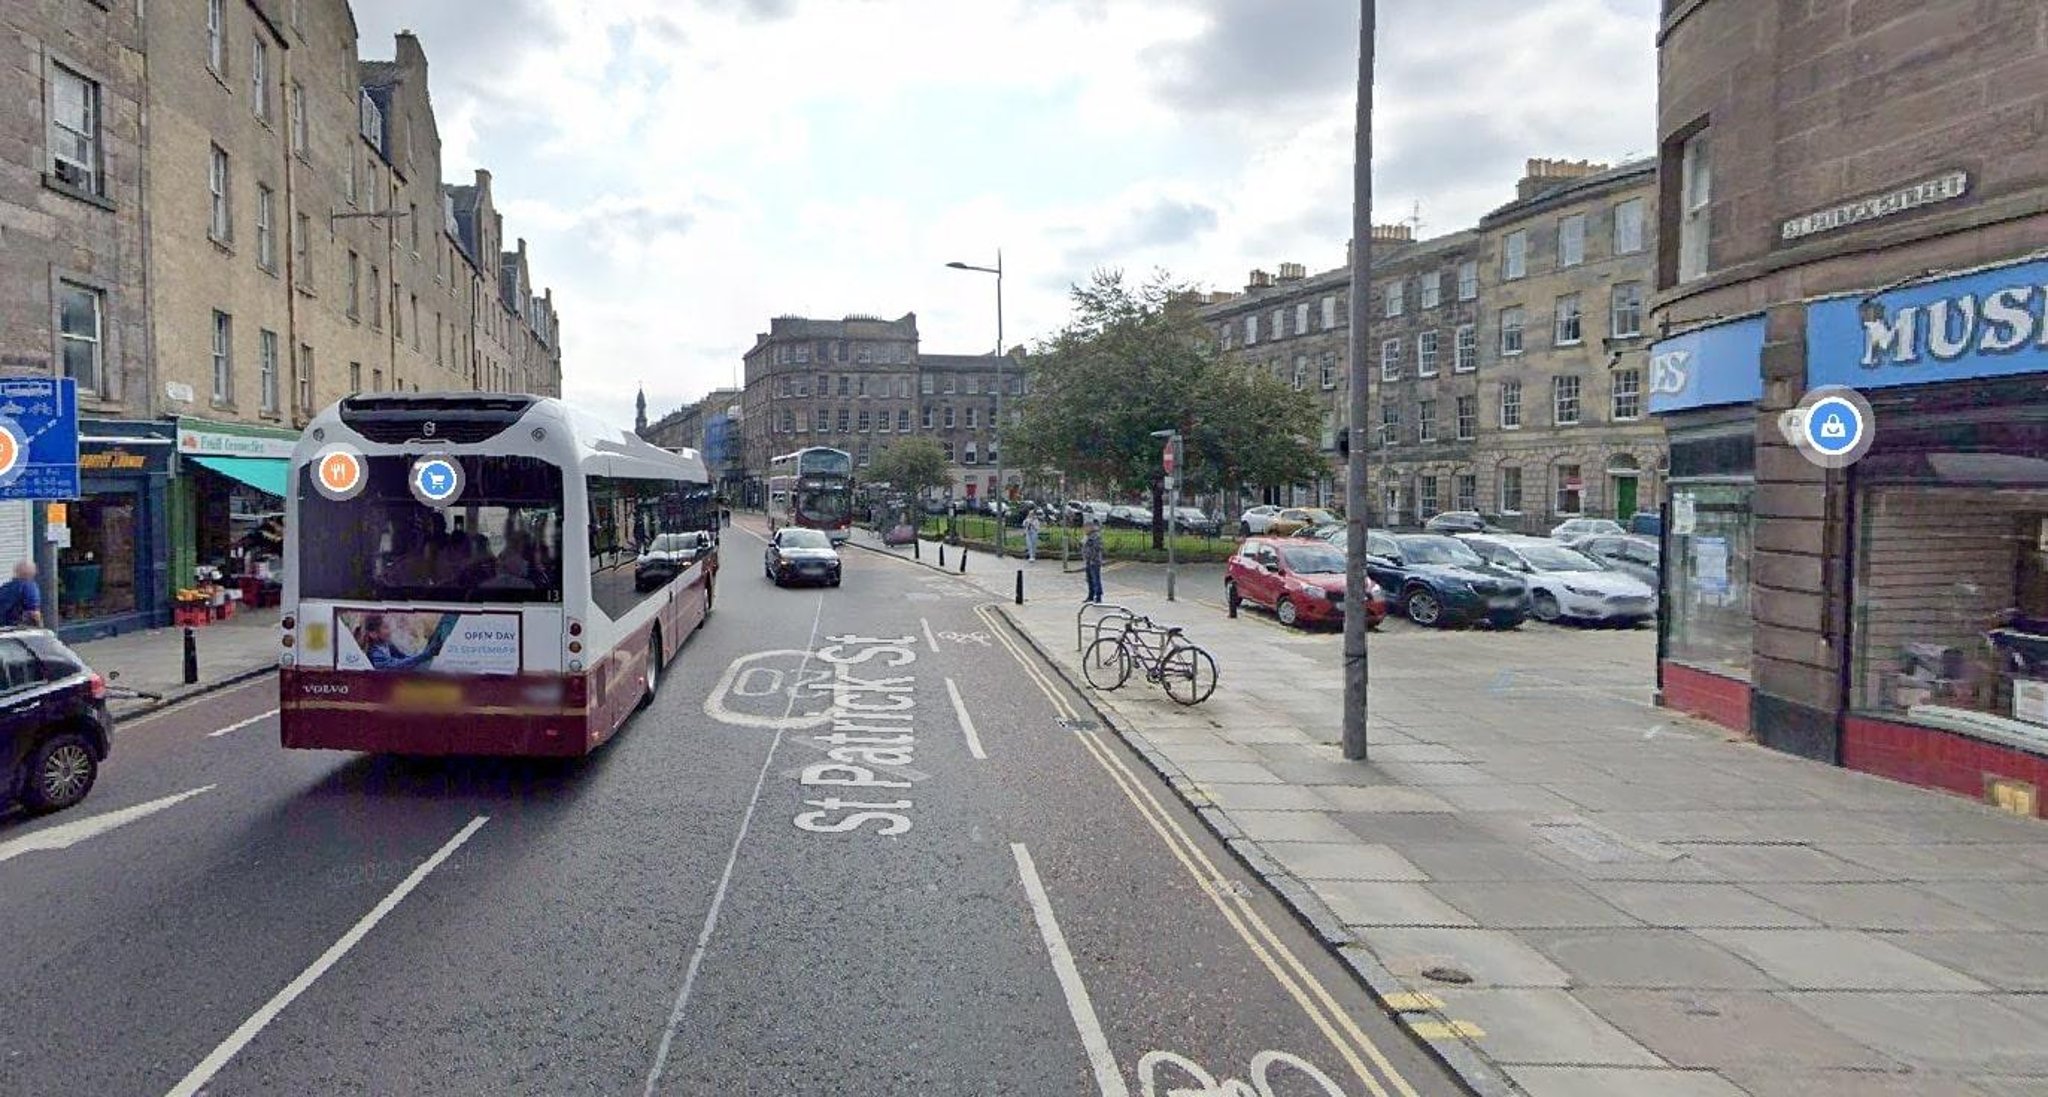 'Unprovoked racist attack' in Edinburgh city centre leaves 26-year-old woman in hospital